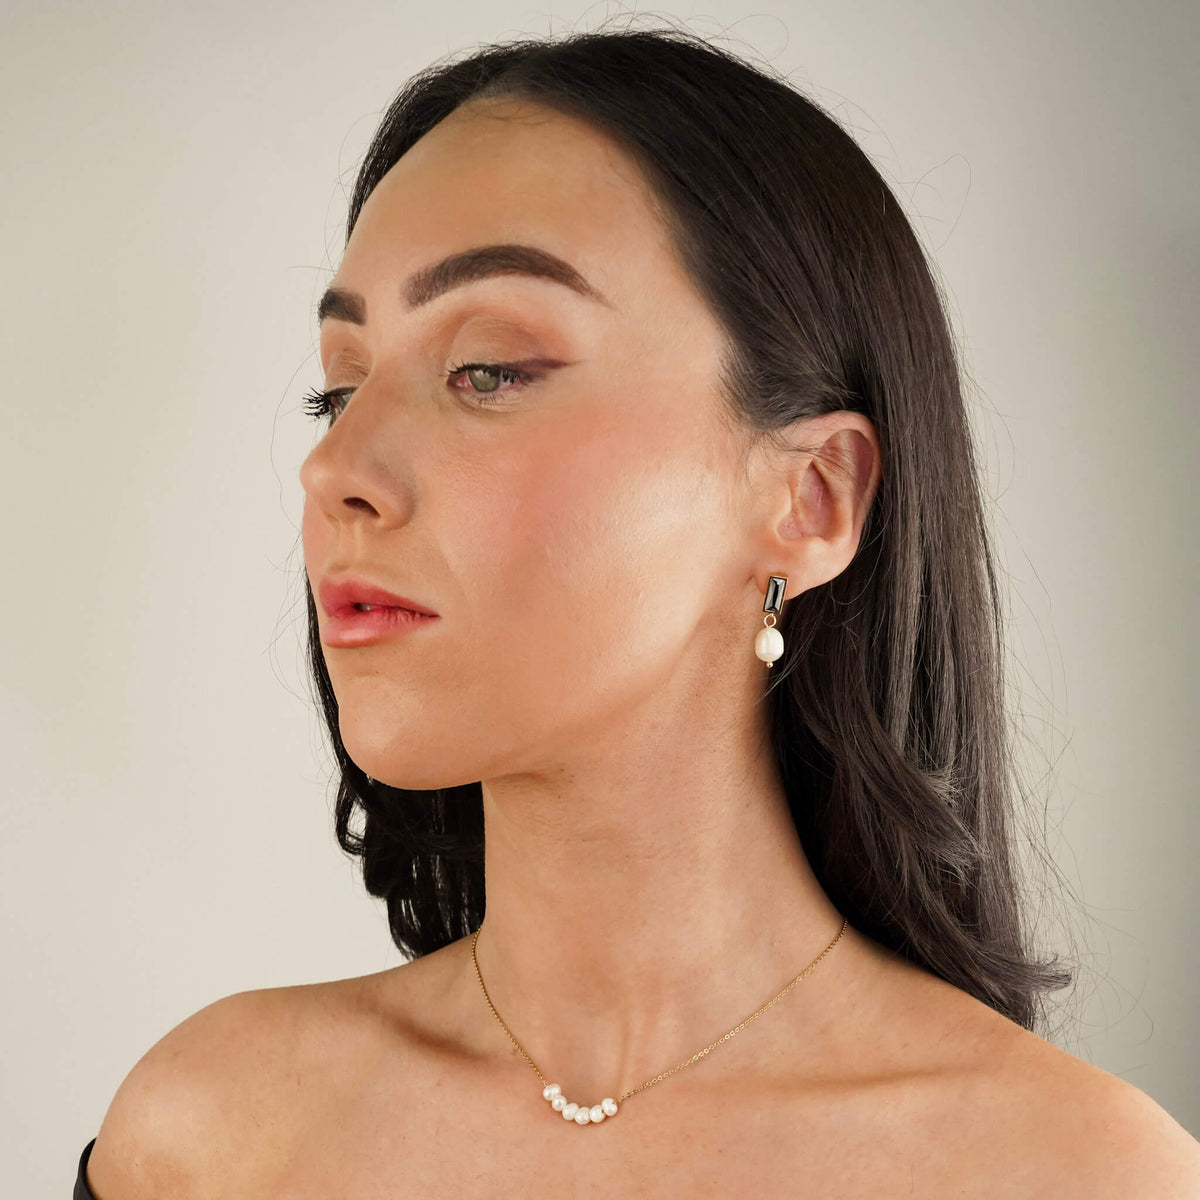 the model is wearing drop style earrings. the earrings have a onyx stone stud with a pearl suspended from them. the black onyx stone and the white pearl create a sophisticated contrast. The model is also wearing the Oceanic Pearl necklace which has 6 pearls.